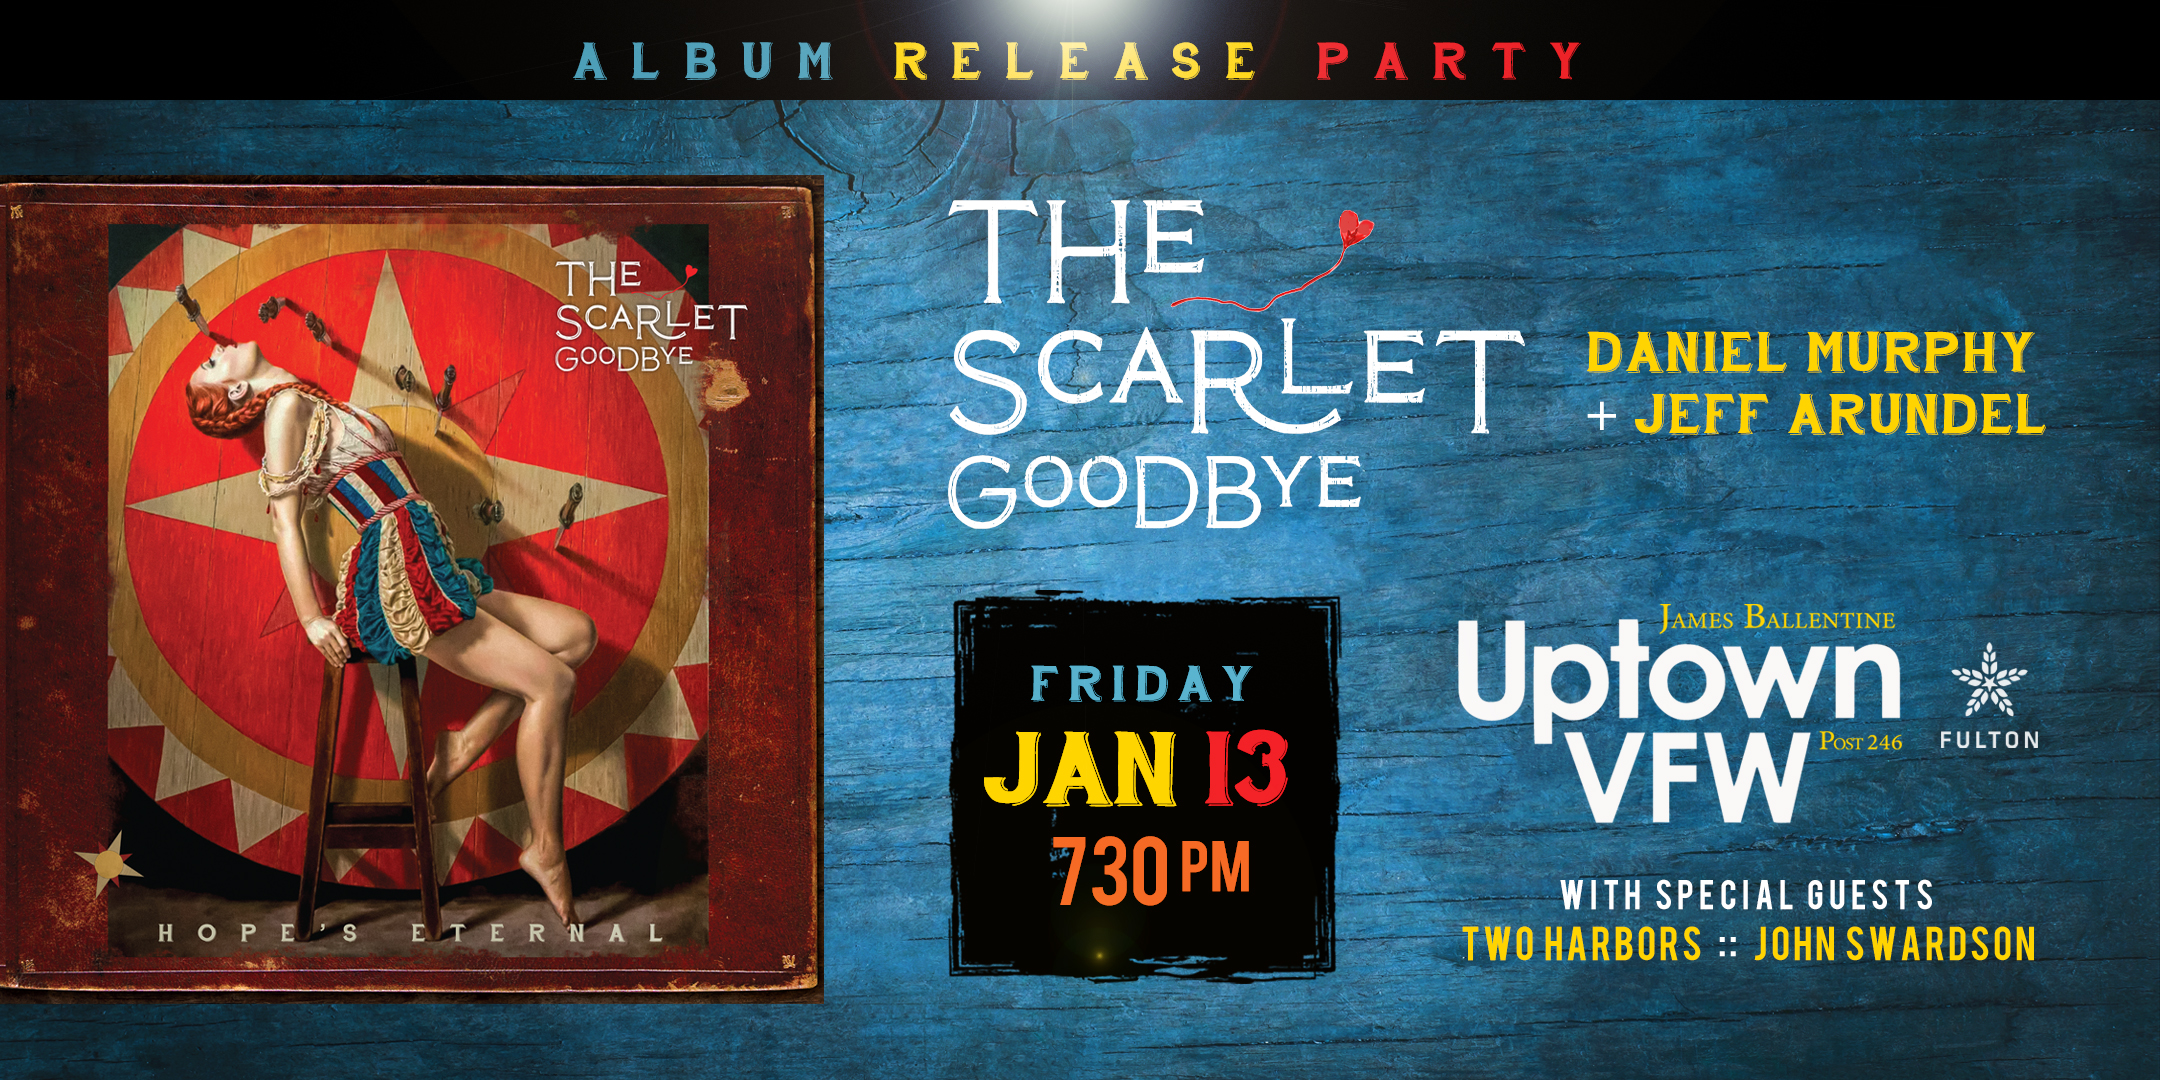 The Scarlet Goodbye Album Release Party with special guests Two Harbors John Swardson Friday January 13 James Ballentine "Uptown" VFW Post 246 Doors 7:00pm :: Music 7:30pm :: 21+ GA $15 ADV / $20 DOS NO REFUNDS